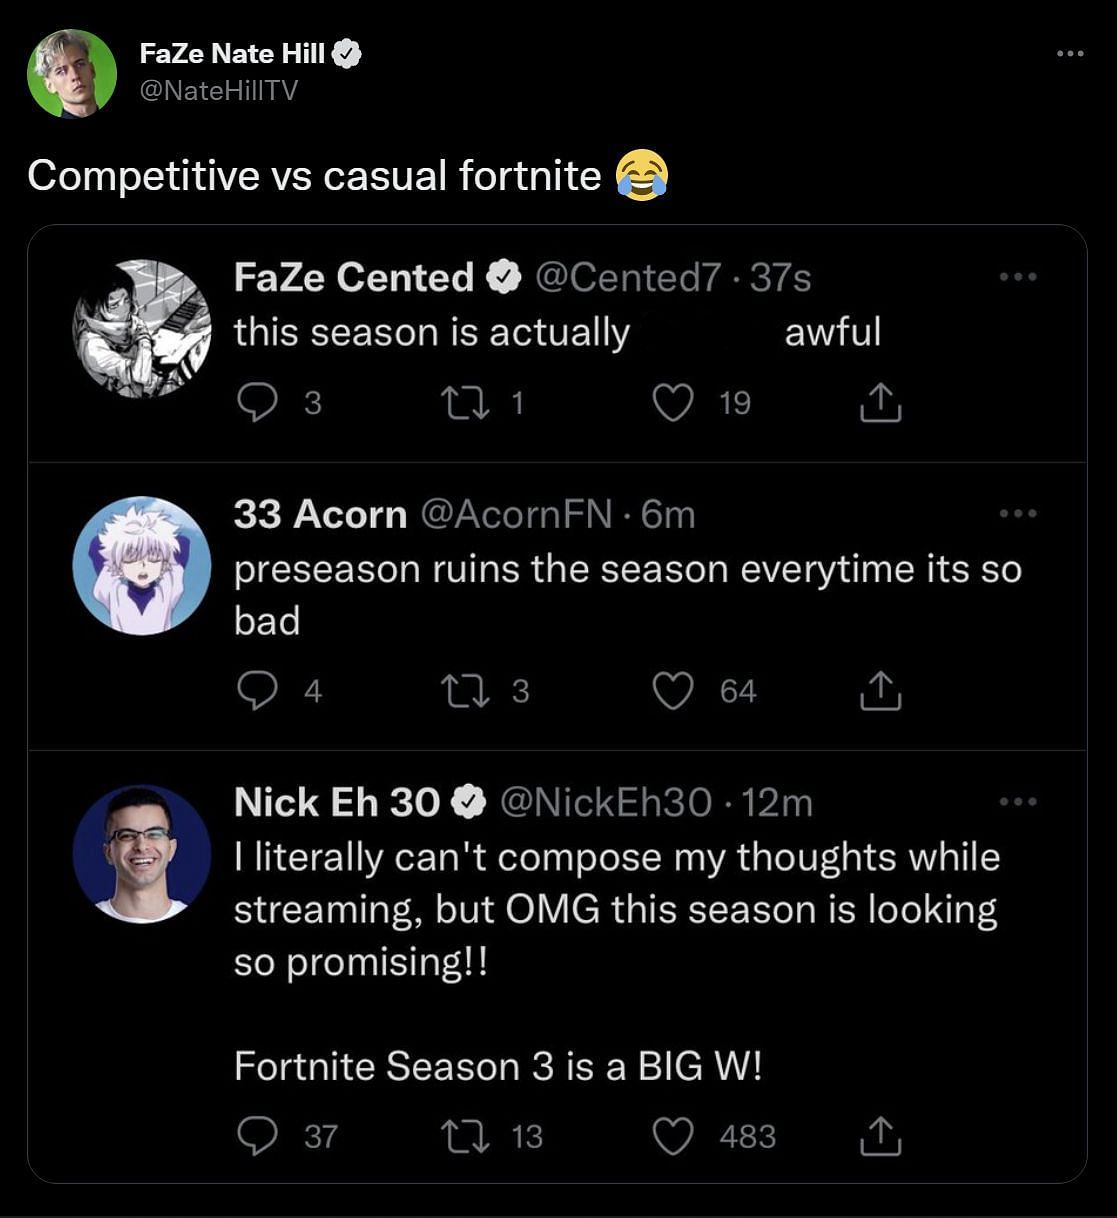 FaZe Nate Hill compares the competitive versus casual gaming community (Image via NateHillTV/Twitter)